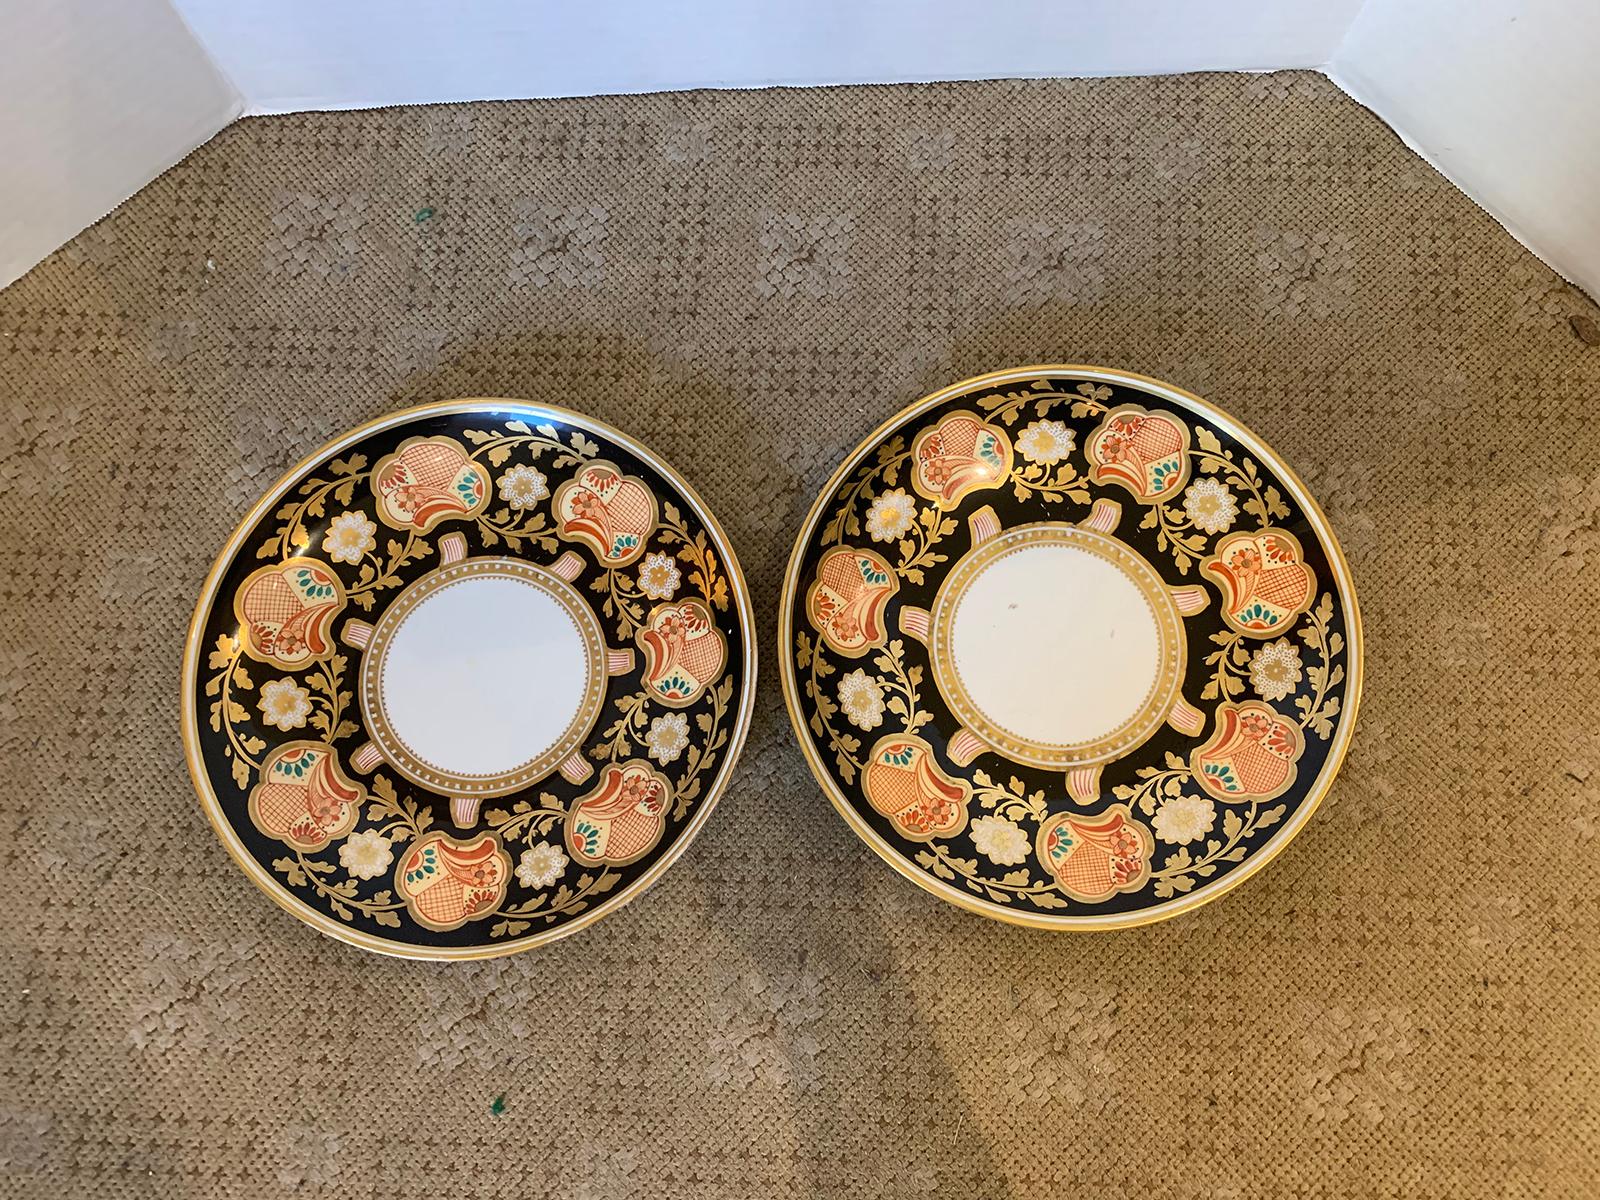 Pair of 19th-20th century English Porcelain dinner plates, black with gilt details, unmarked.